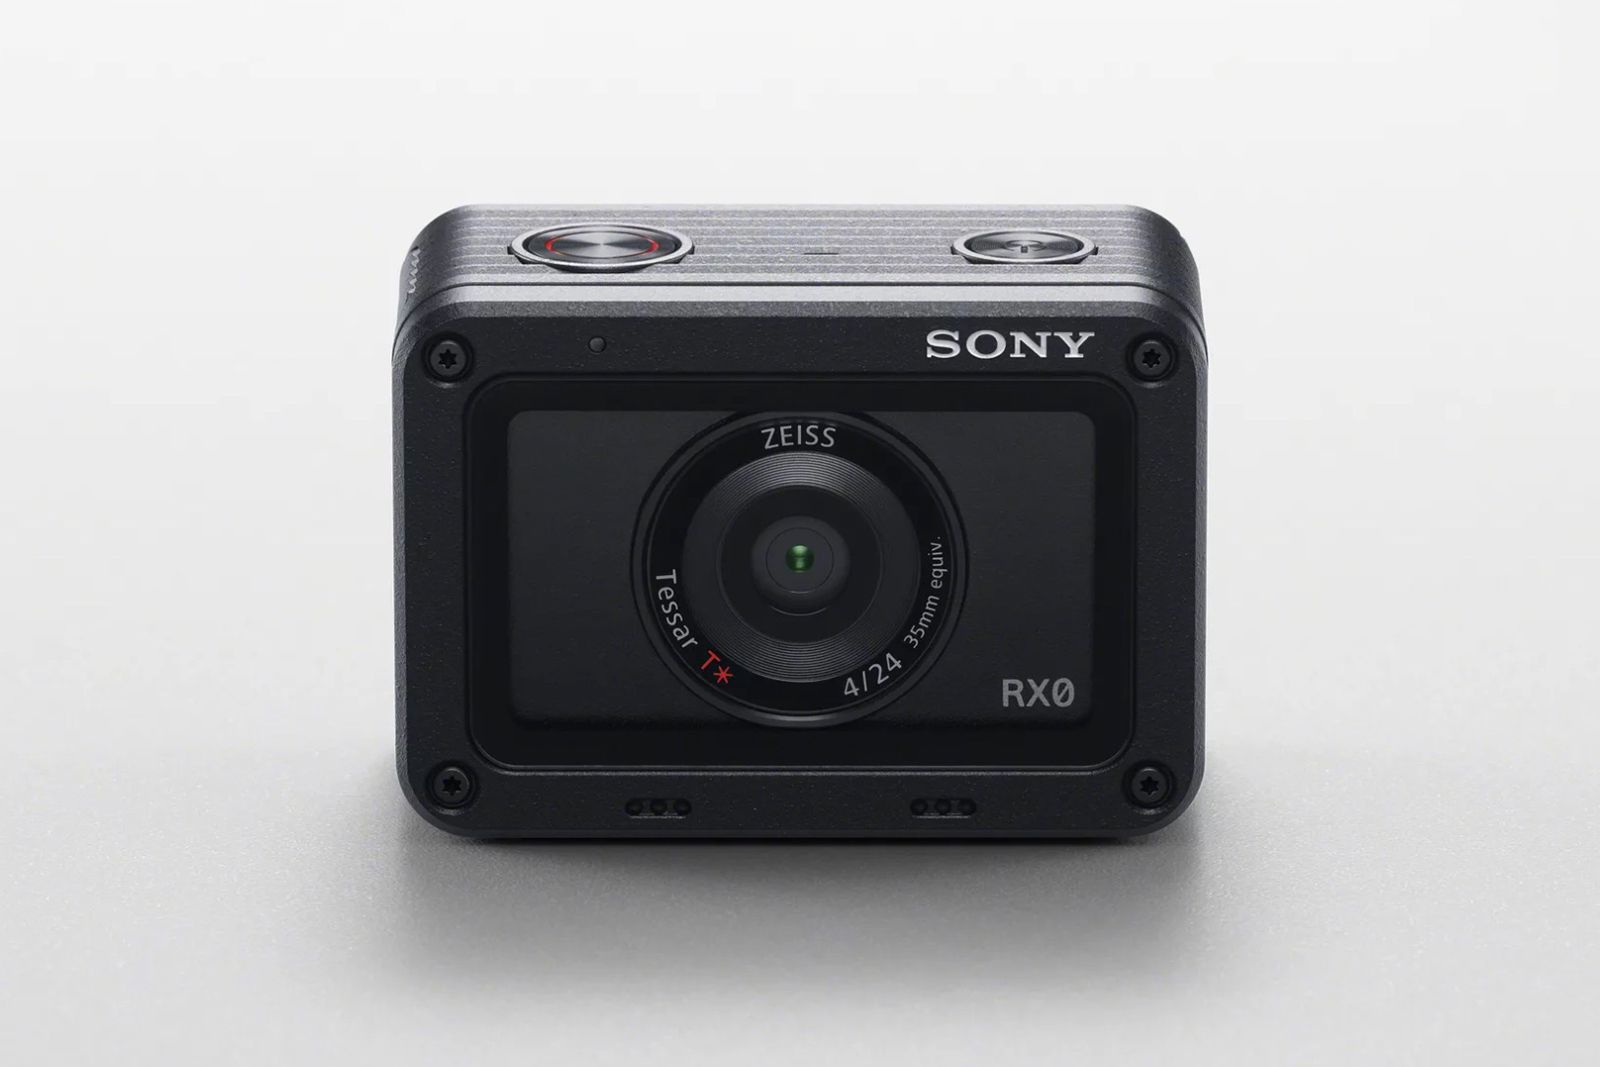 Sony goes after GoPro with its own rugged and waterproof RXO camera image 1